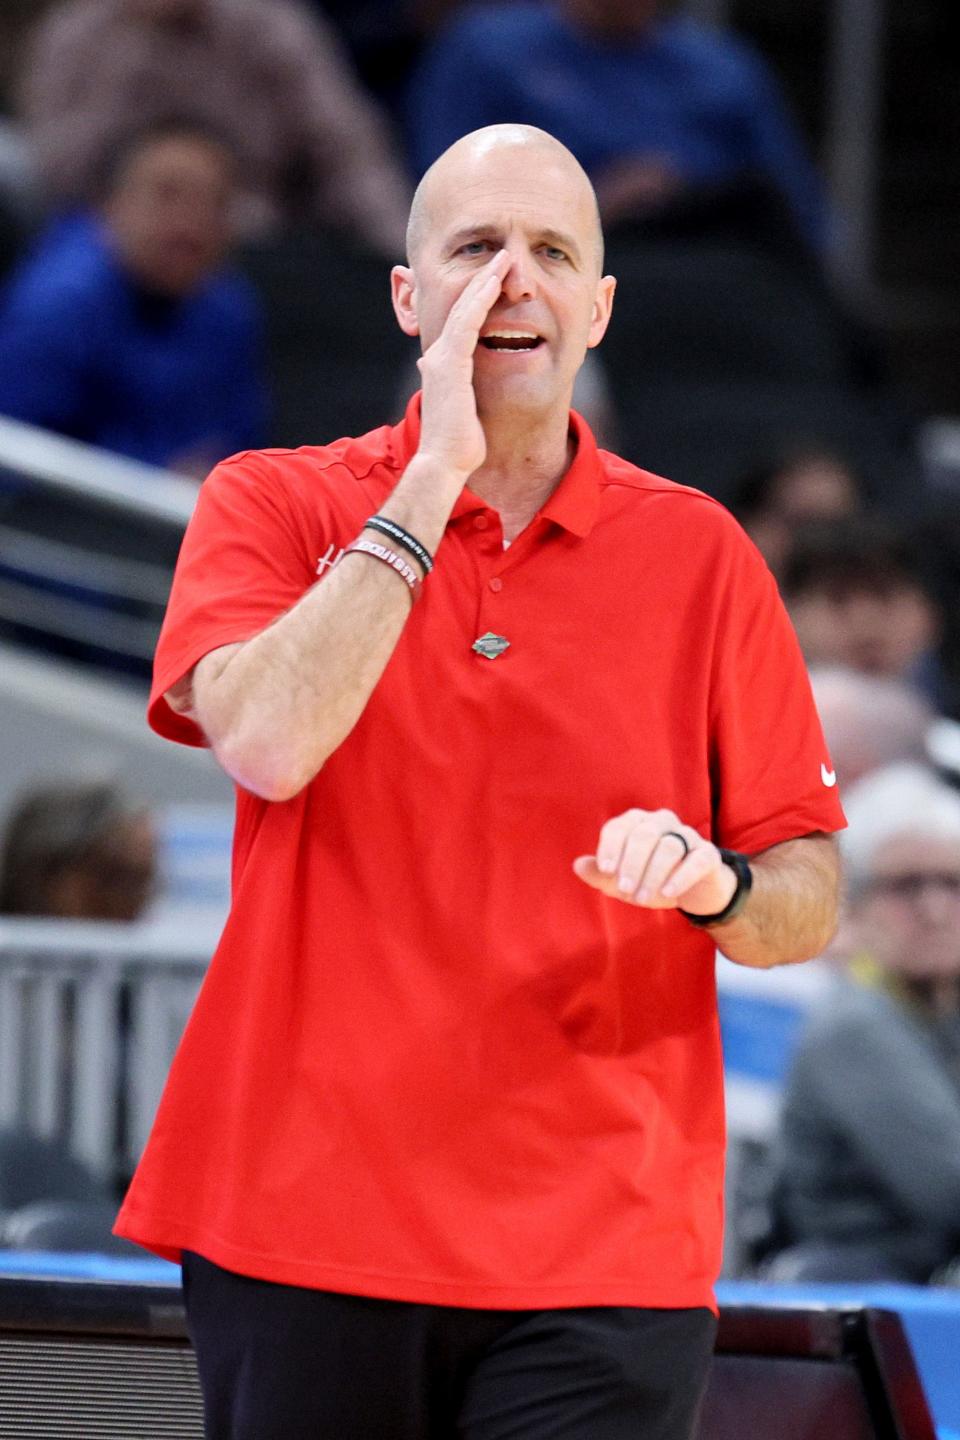 INDIANAPOLIS, INDIANA - MARCH 22: Head coach Steve Lutz of the Western Kentucky Hilltoppers reacts against the Marquette Golden Eagles during the first half in the first round of the NCAA Men's Basketball Tournament at Gainbridge Fieldhouse on March 22, 2024 in Indianapolis, Indiana. (Photo by Andy Lyons/Getty Images) ORG XMIT: 776103536 ORIG FILE ID: 2104759936